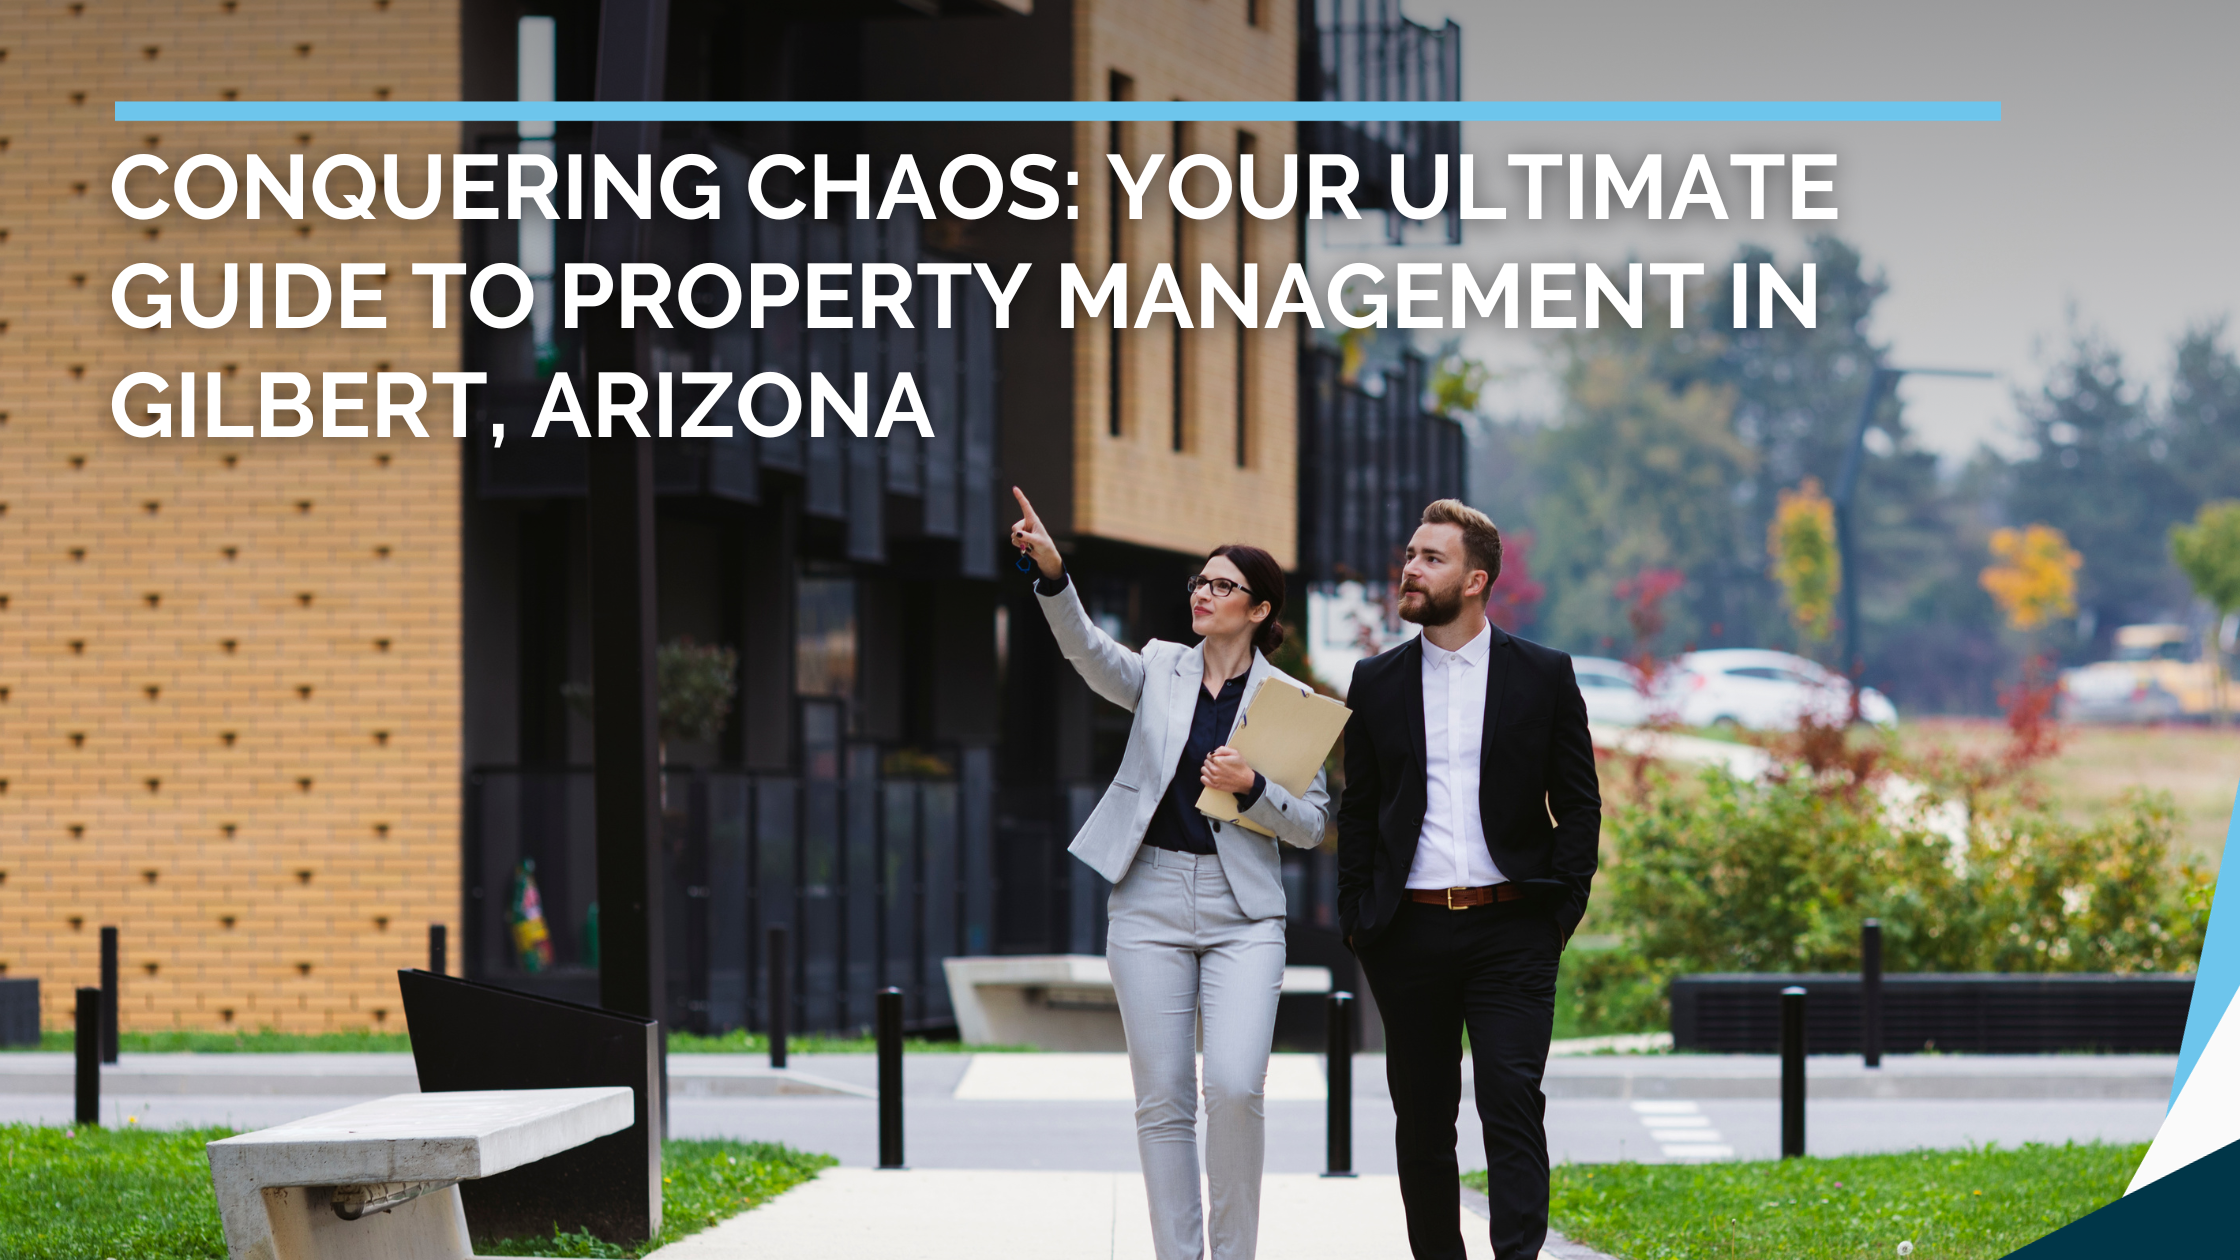 Conquering Chaos: Your Ultimate Guide to Property Management in Gilbert, Arizona